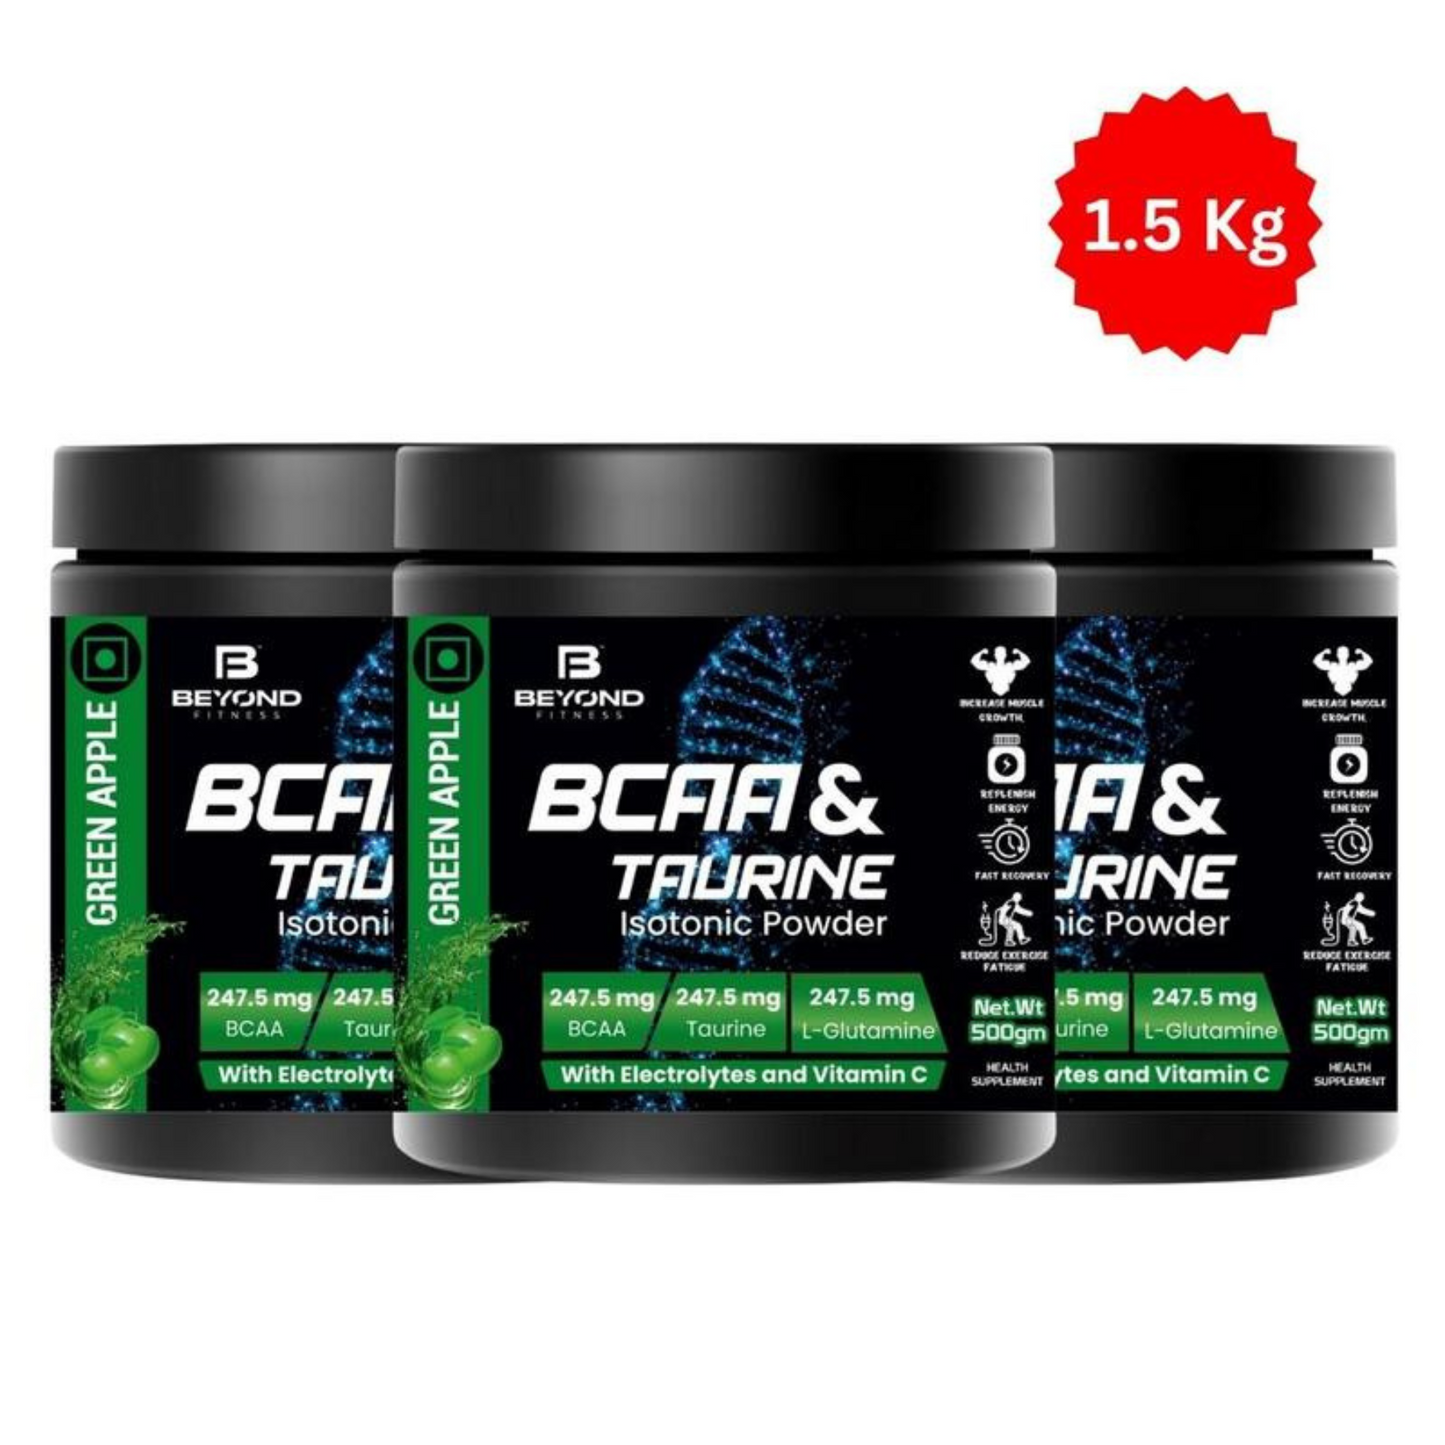 Beyond Fitness BCAA & TAURINE Isotonic Energy Drink Powder, 500gm (Pack of 3) with 1.5 Gallon Bottle